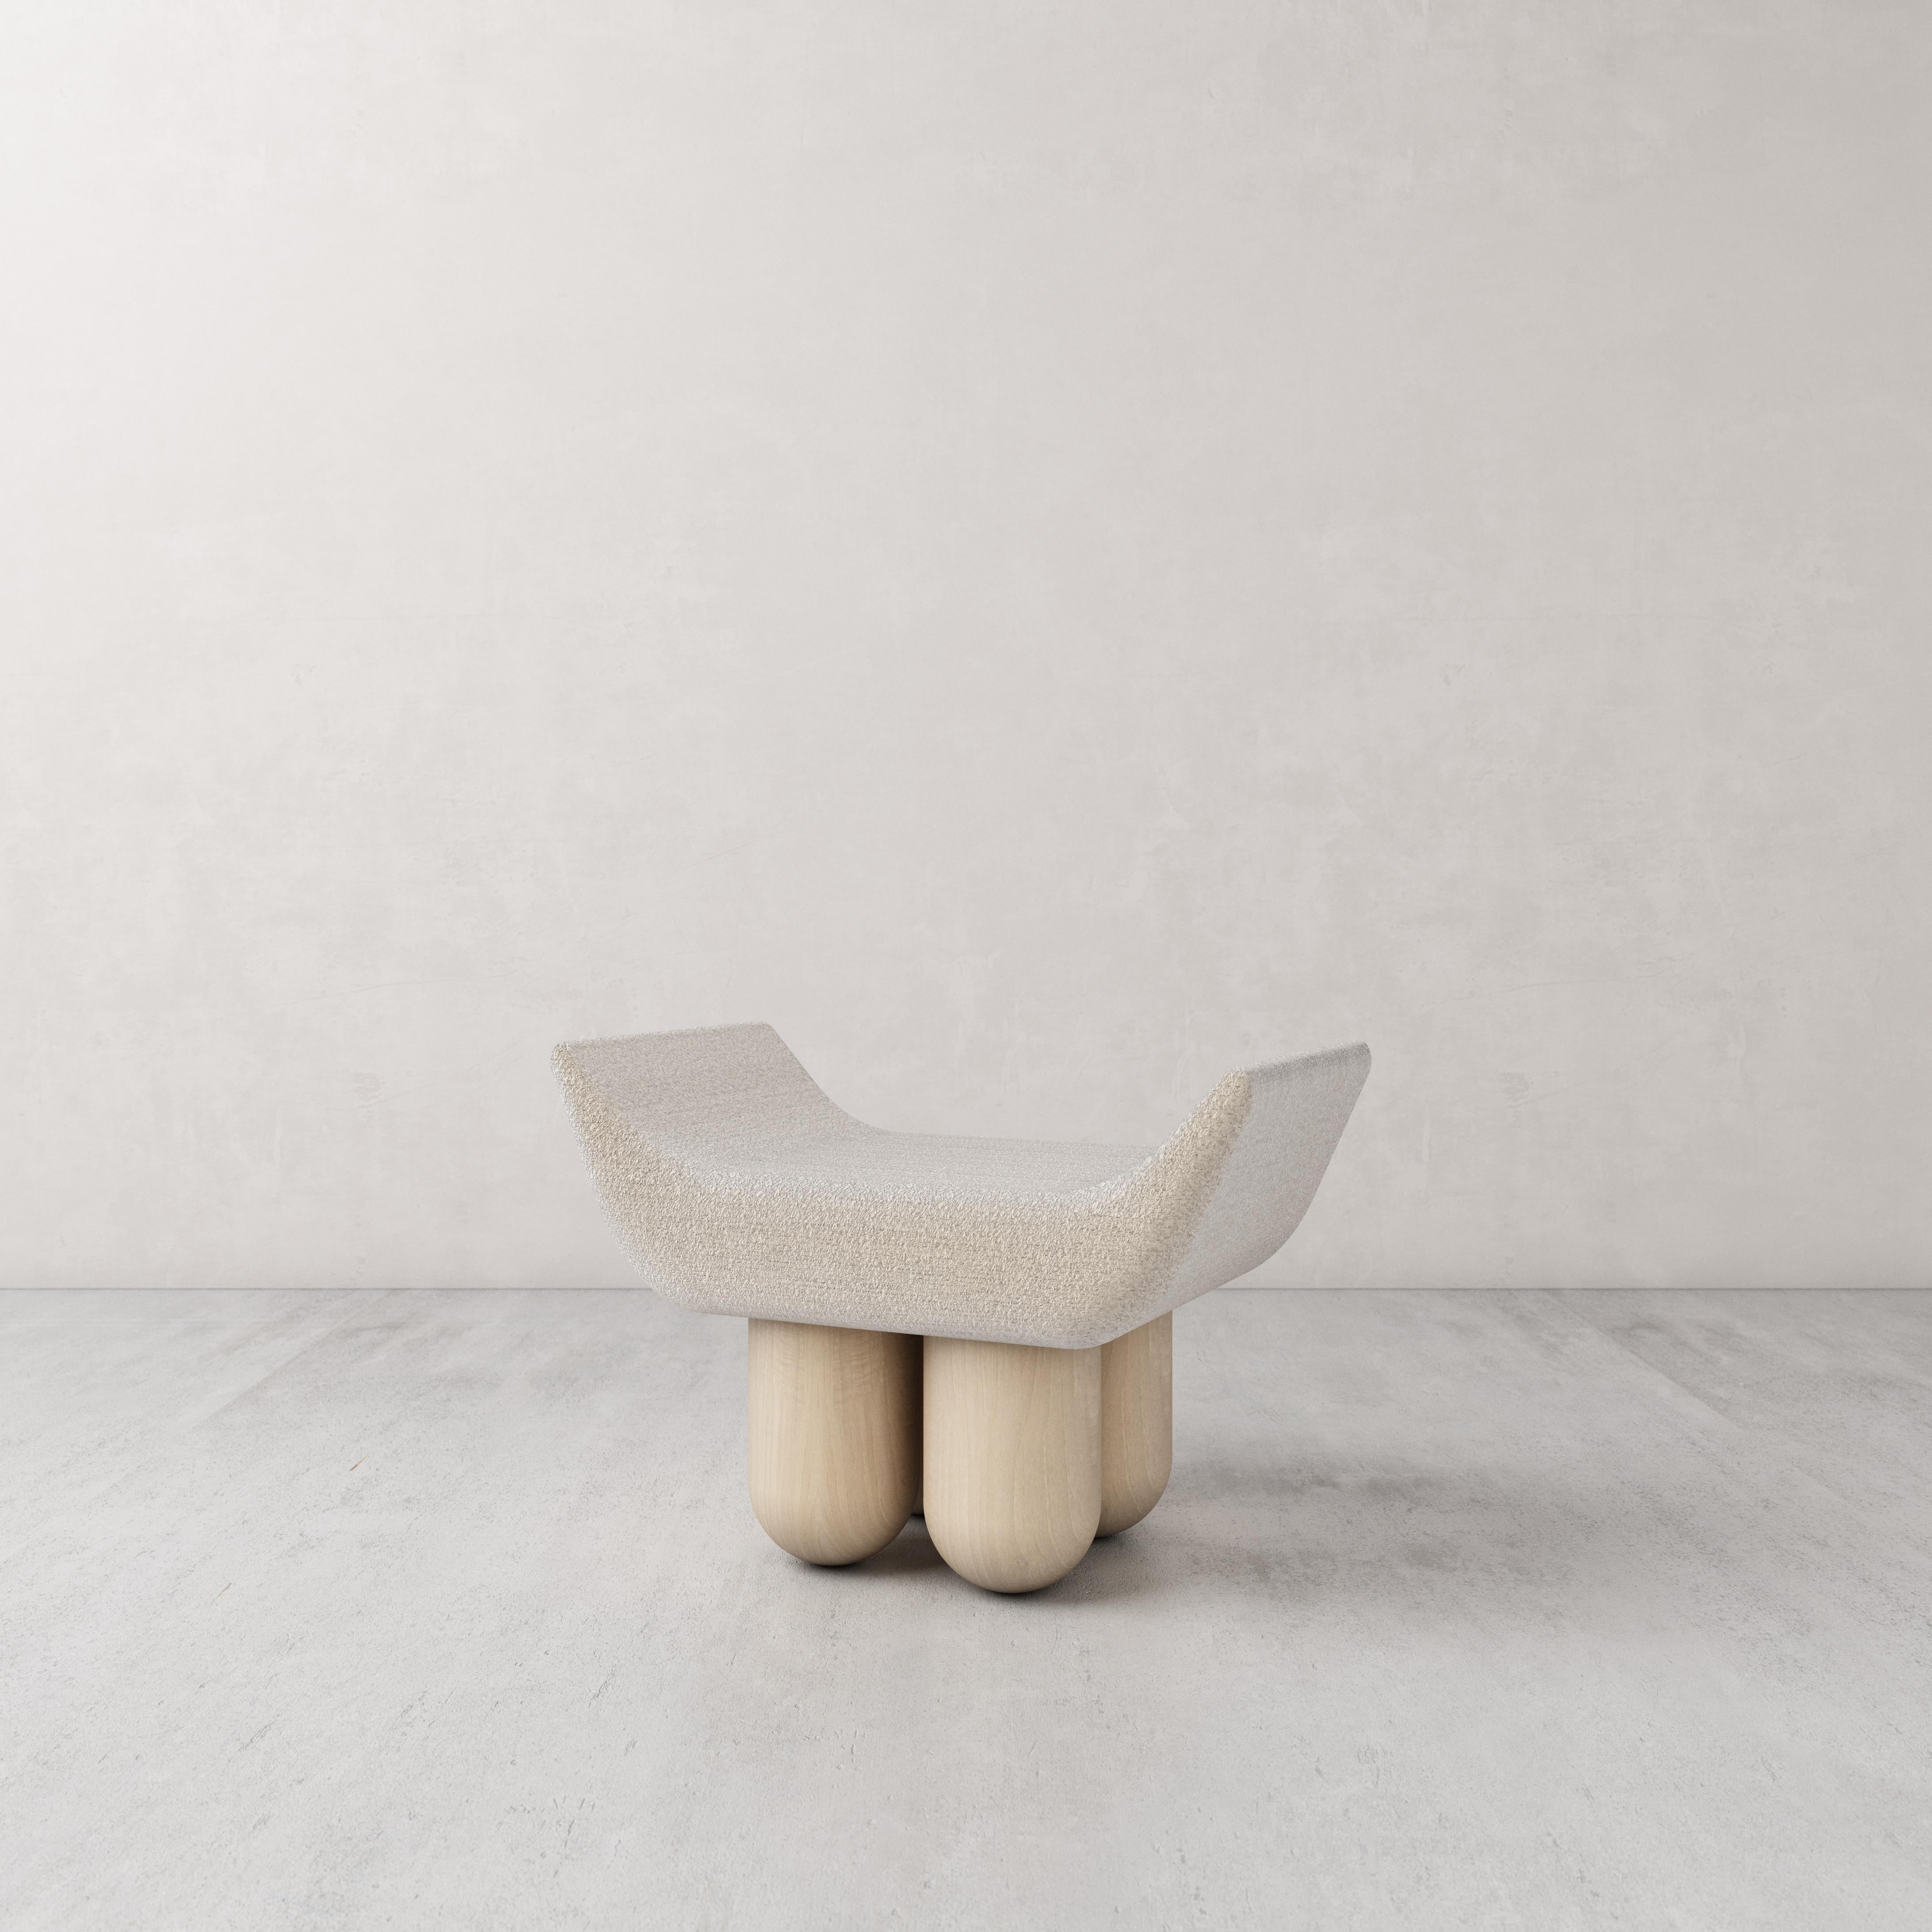 Taurus by Pietro Franceschini
Sold exclusively by Galerie Philia
Manufacturer: Stefano Minotti
Dimensions: W 76 x L 52 x H 54 cm
Materials: Lamb and ashwood
Available in Bouclé

Pietro Franceschini is an architect and designer based in New